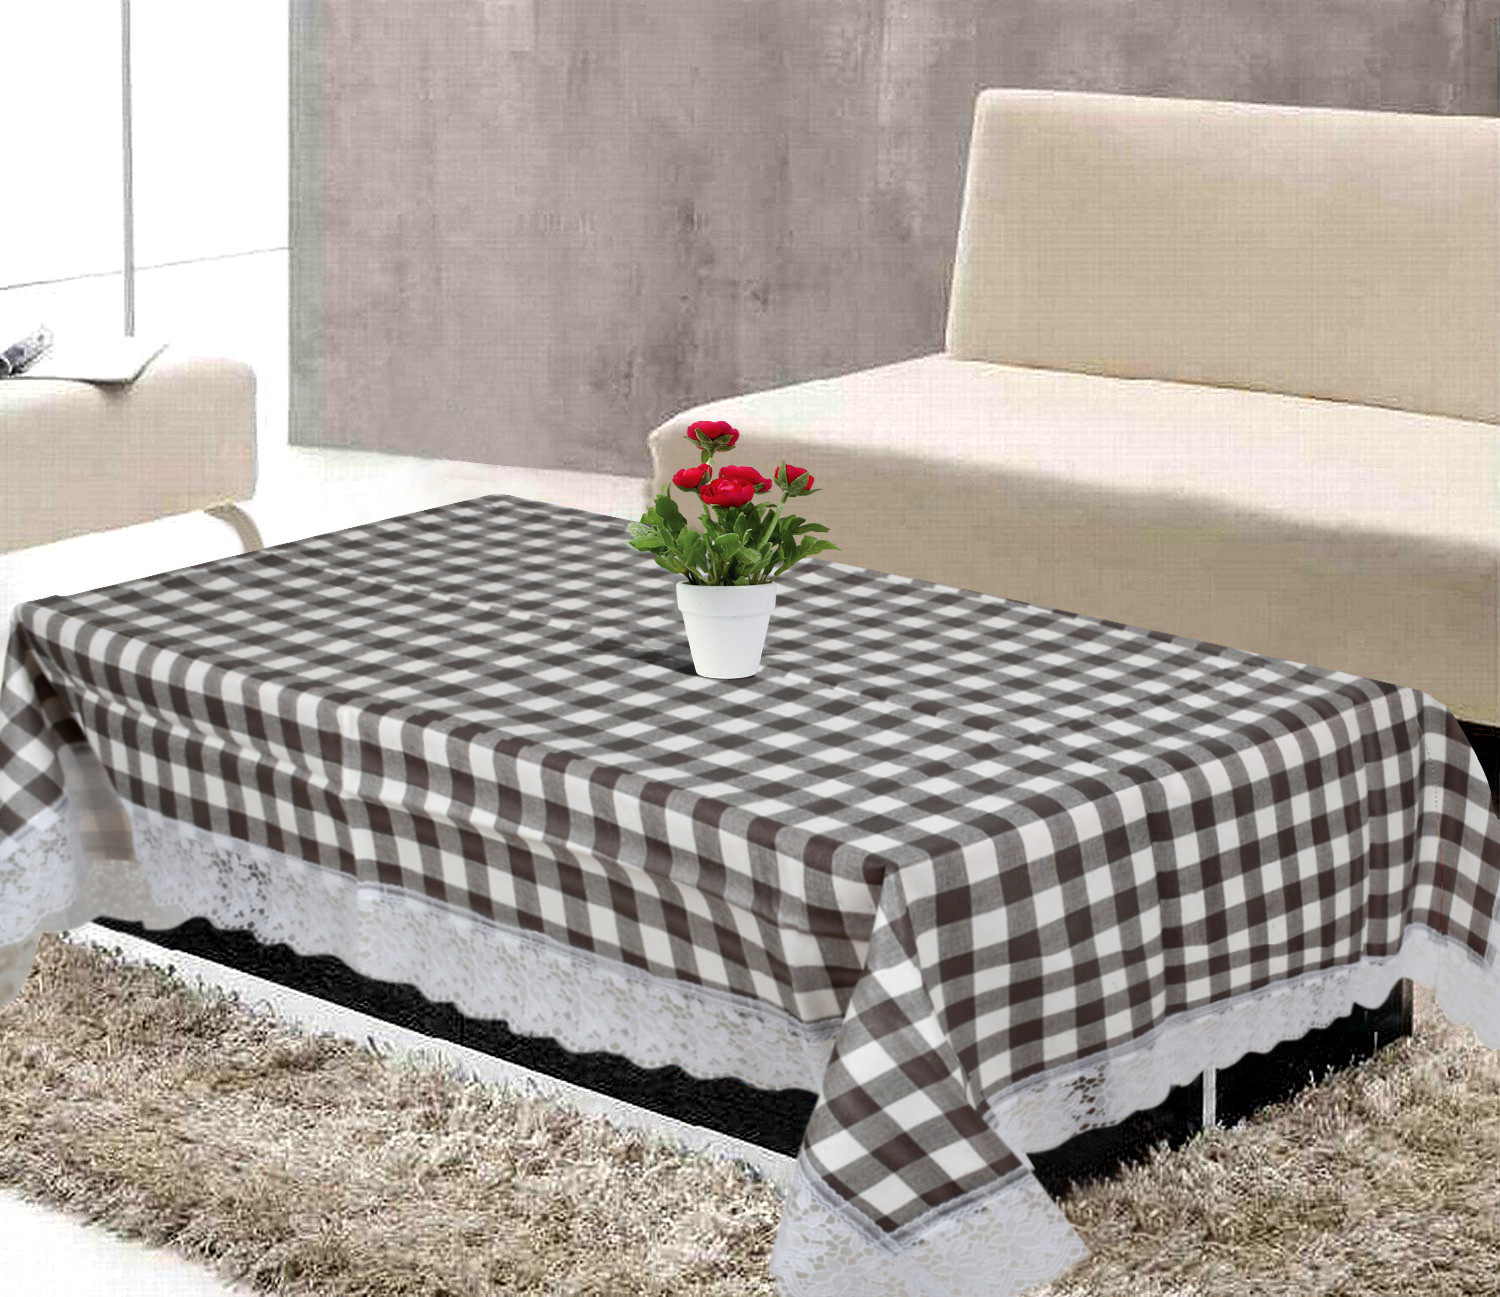 Kuber Industries Checkered Print PVC 4 Seater Center Table Cover 40